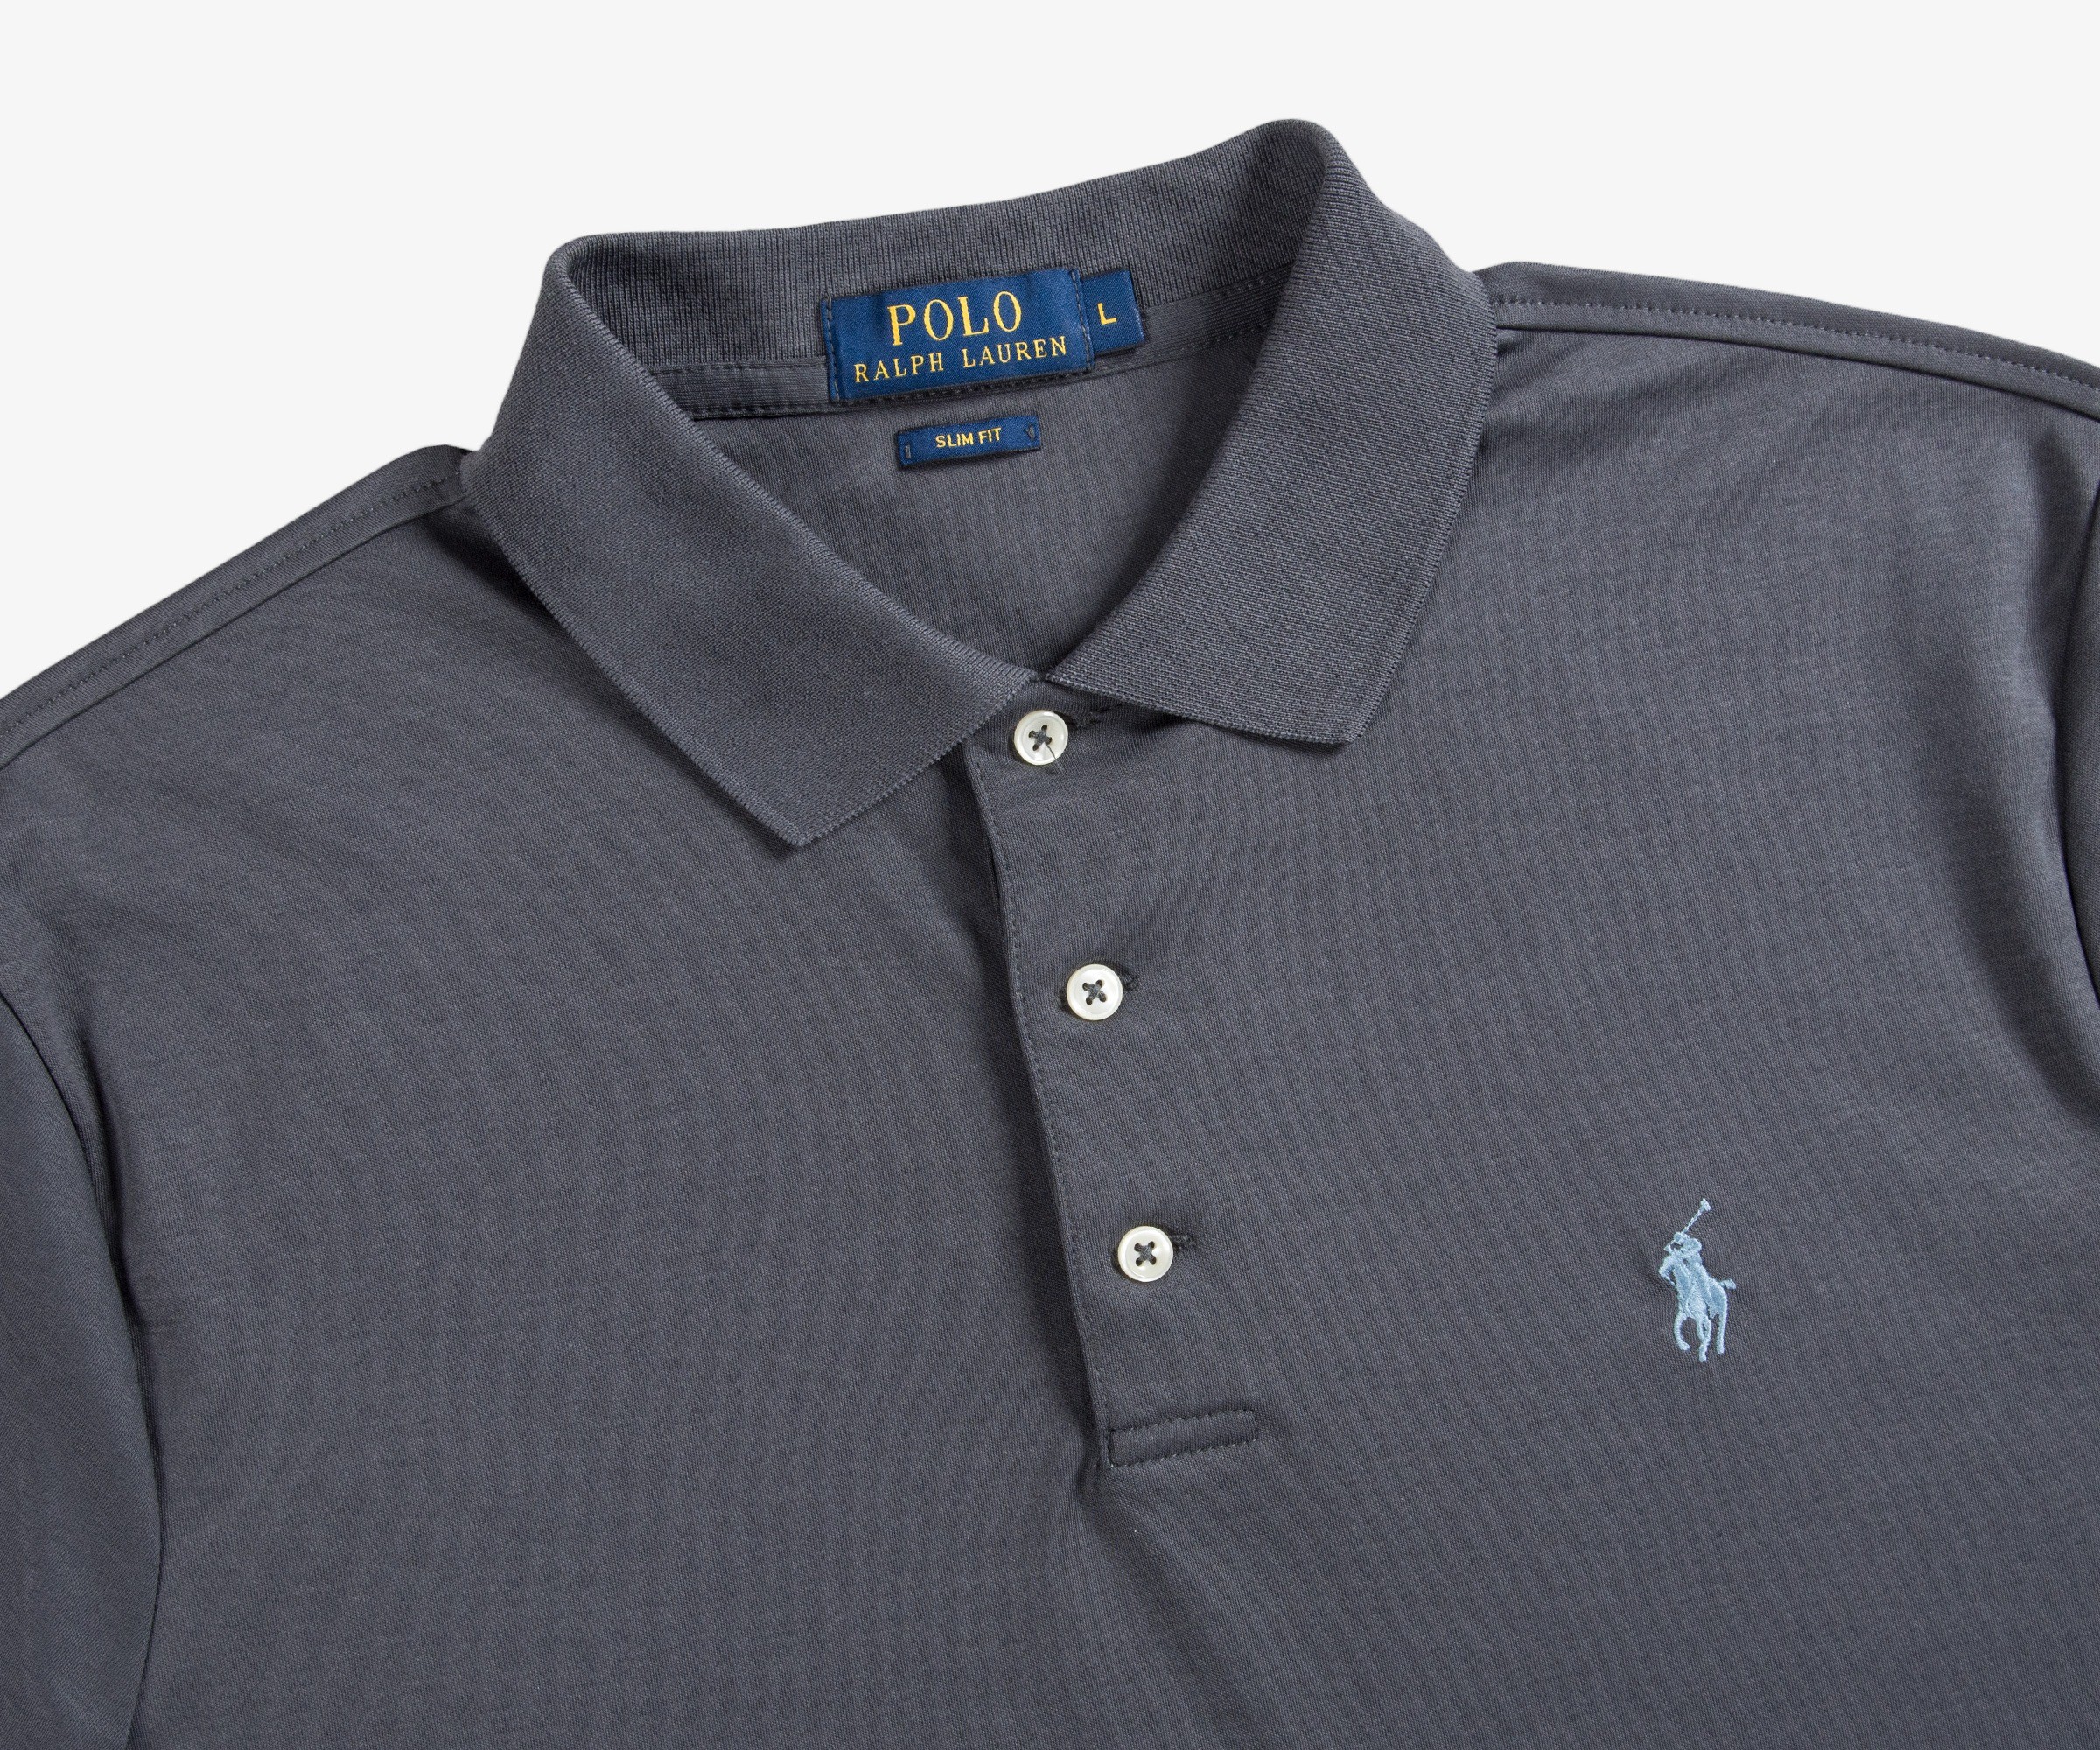 Polo Ralph Lauren Slim Fit Pima Soft Touch 3 Button Polo Shirt Charcoal Grey